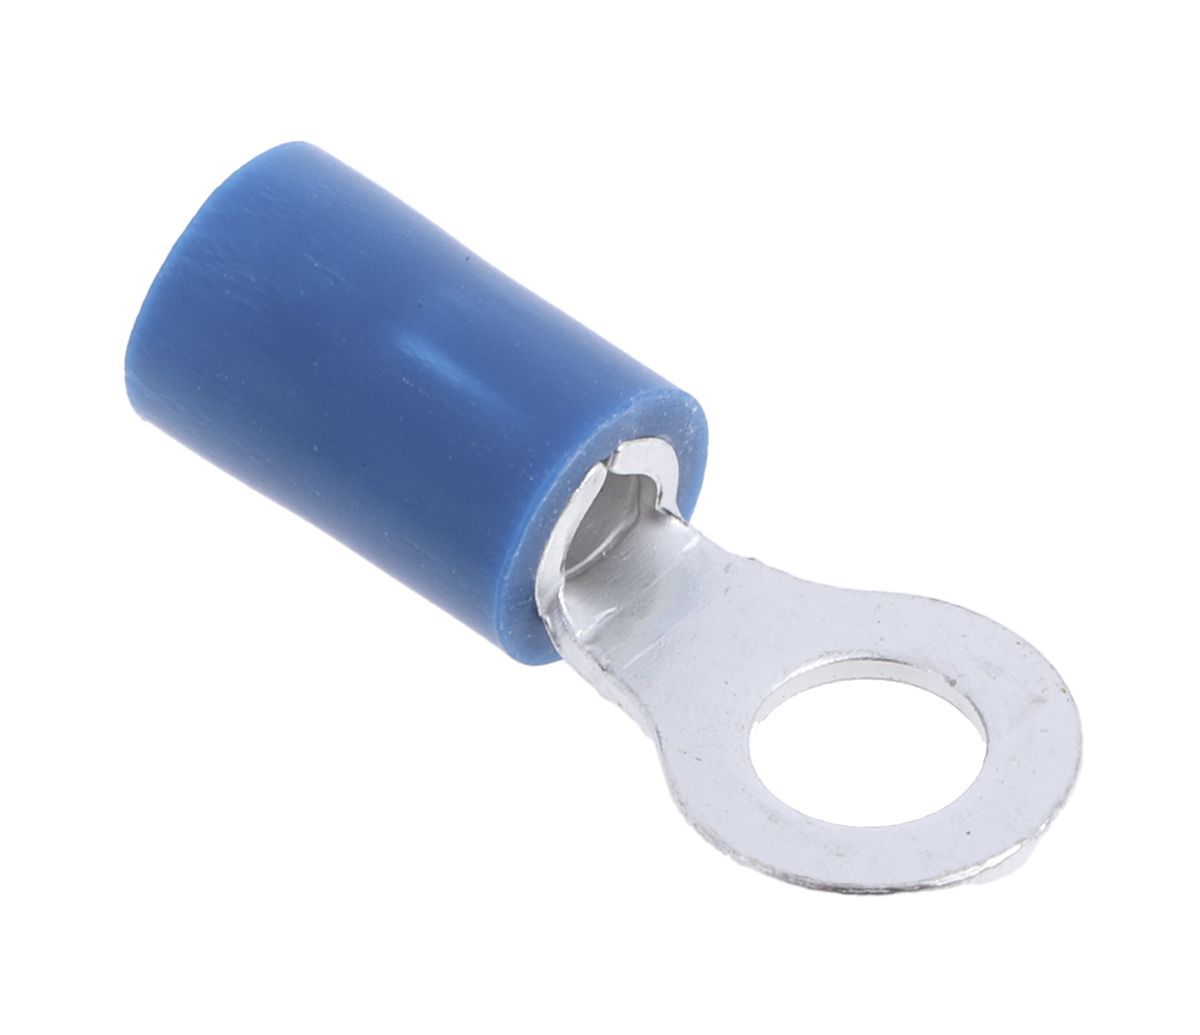 RS PRO Insulated Ring Terminal, M4 Stud Size, 1.5mm² to 2.5mm² Wire Size, Blue